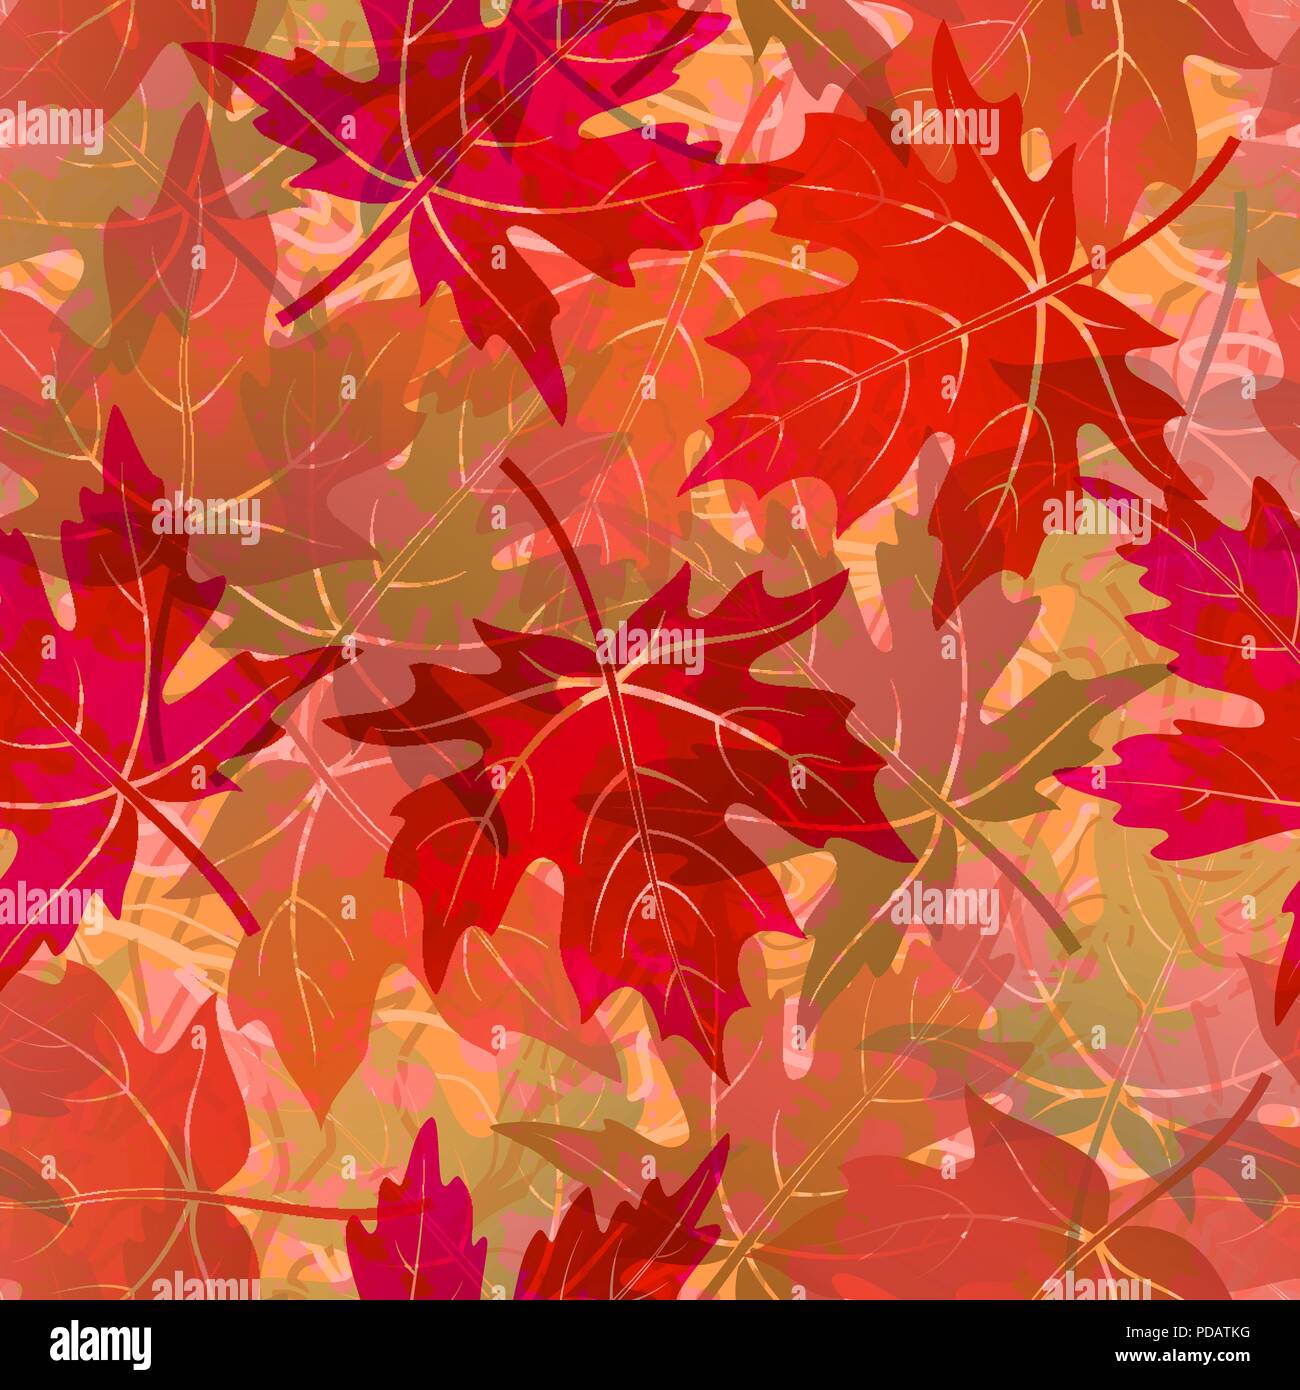 Seamless Background, Tile Pattern of Red Autumn Maple Tree Leaves. Vector Stock Vector